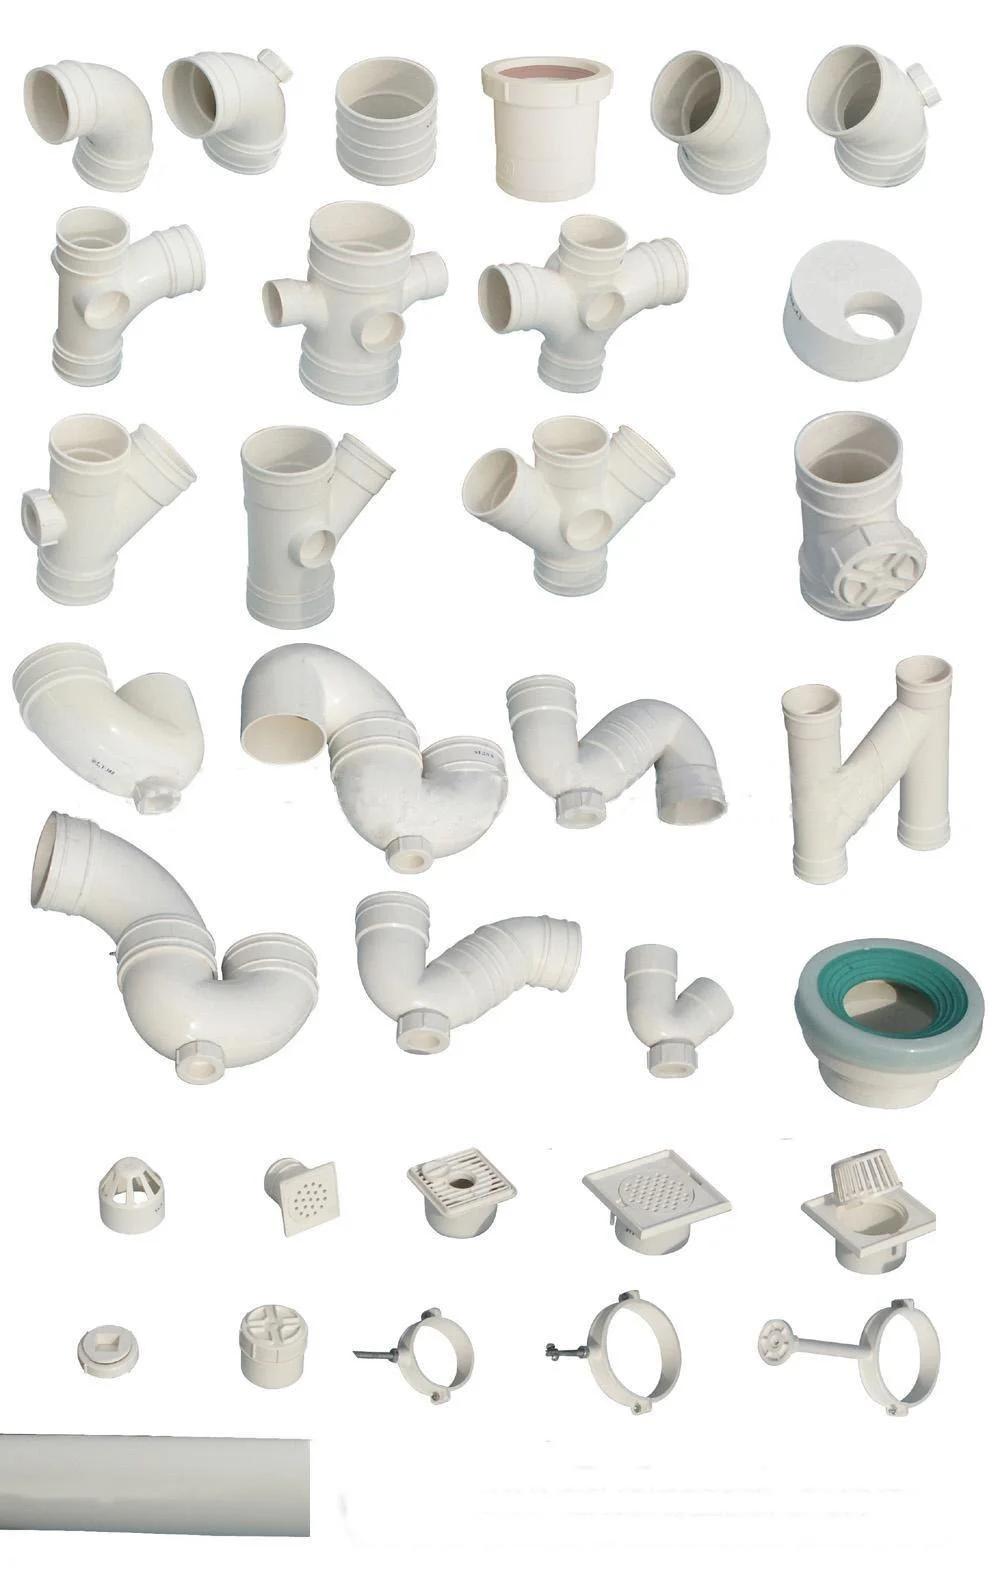 PVC Pipe Fittings, H Type Pipe Connector, Plastic Mould